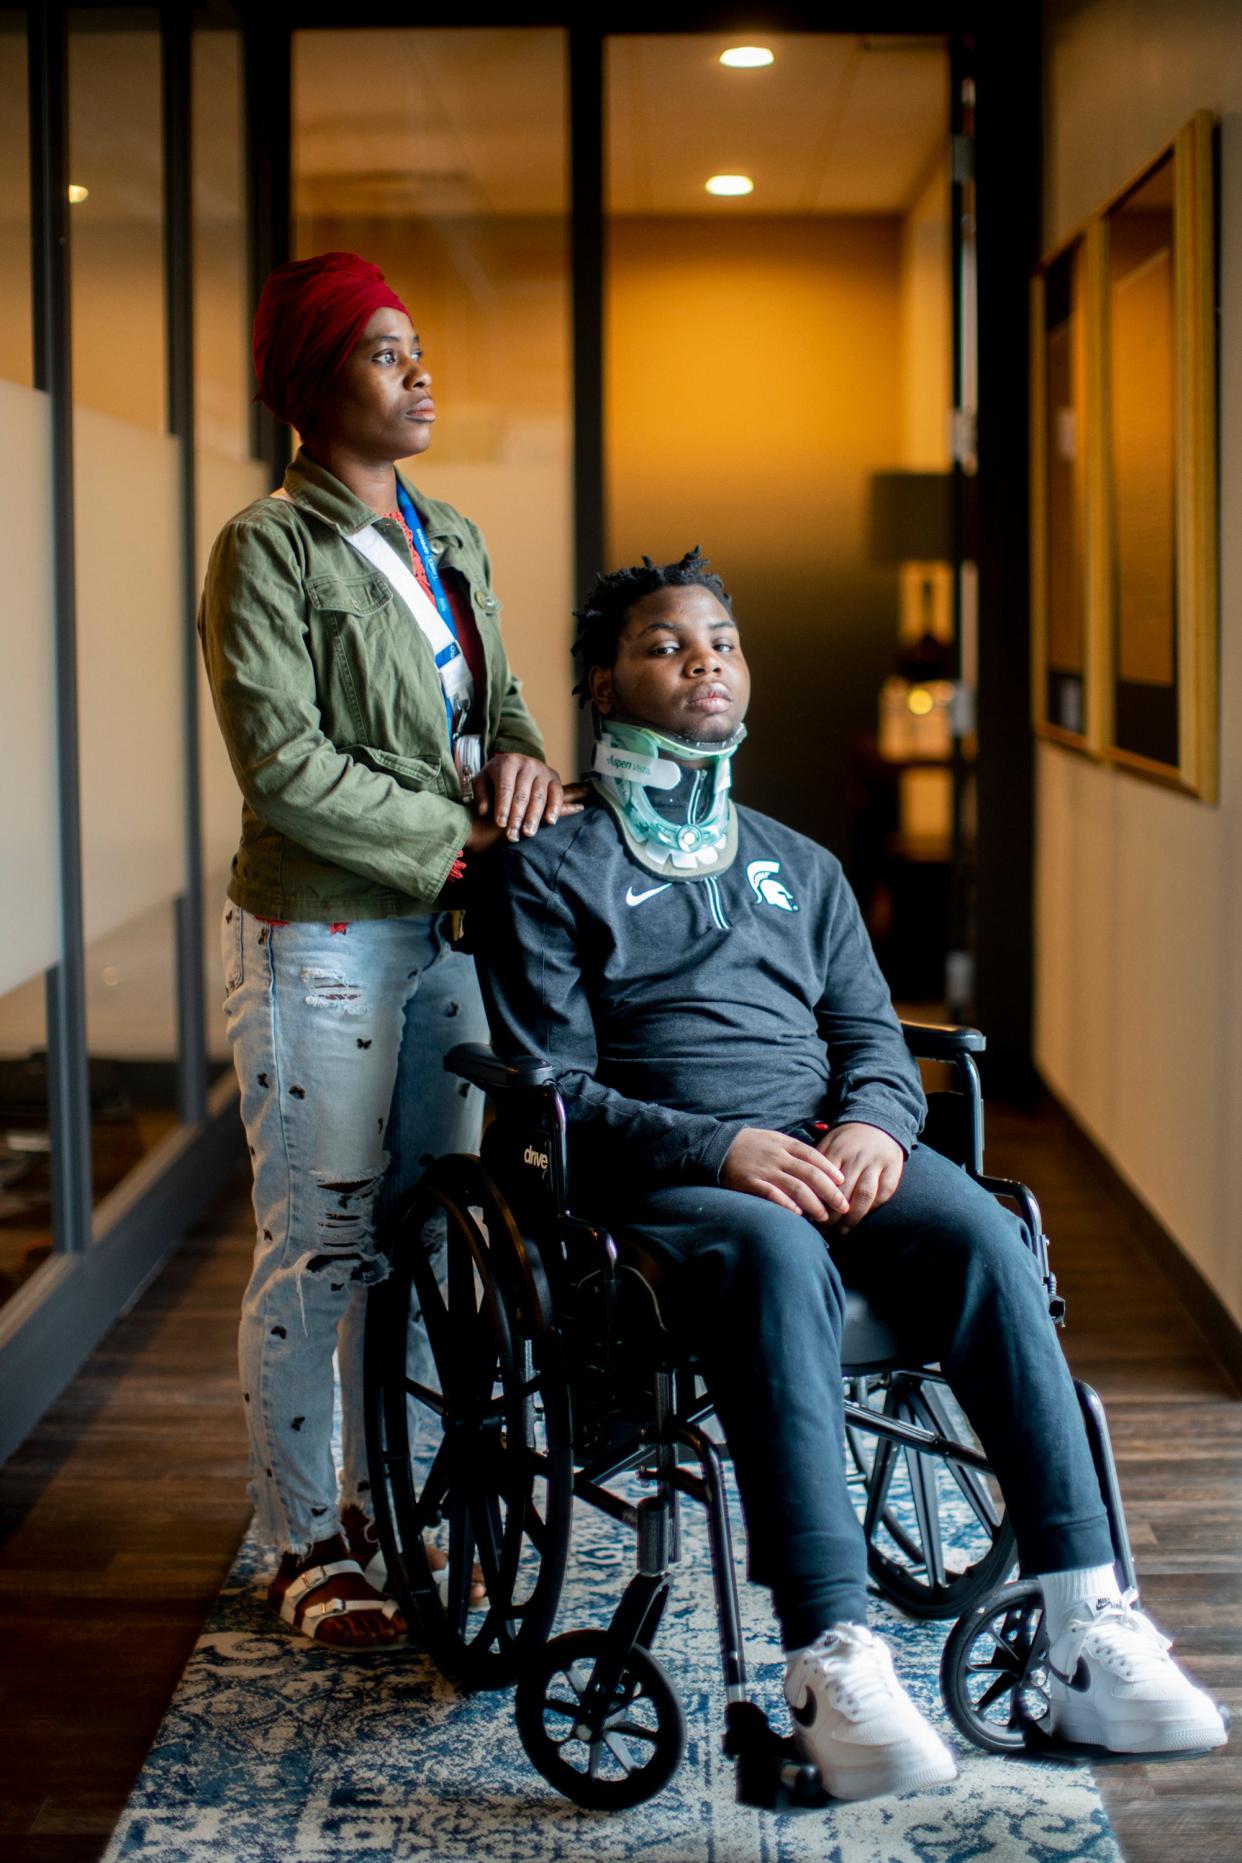 Mary S. Washington with her son Damarion Allen, now 16. Damarion was paralyzed from the chest down on May 7 inside the Franklin County Juvenile Intervention Center. His injury was detailed as part of an eight-month investigation into problems inside Ohio's youth prisons and juvenile detention centers.